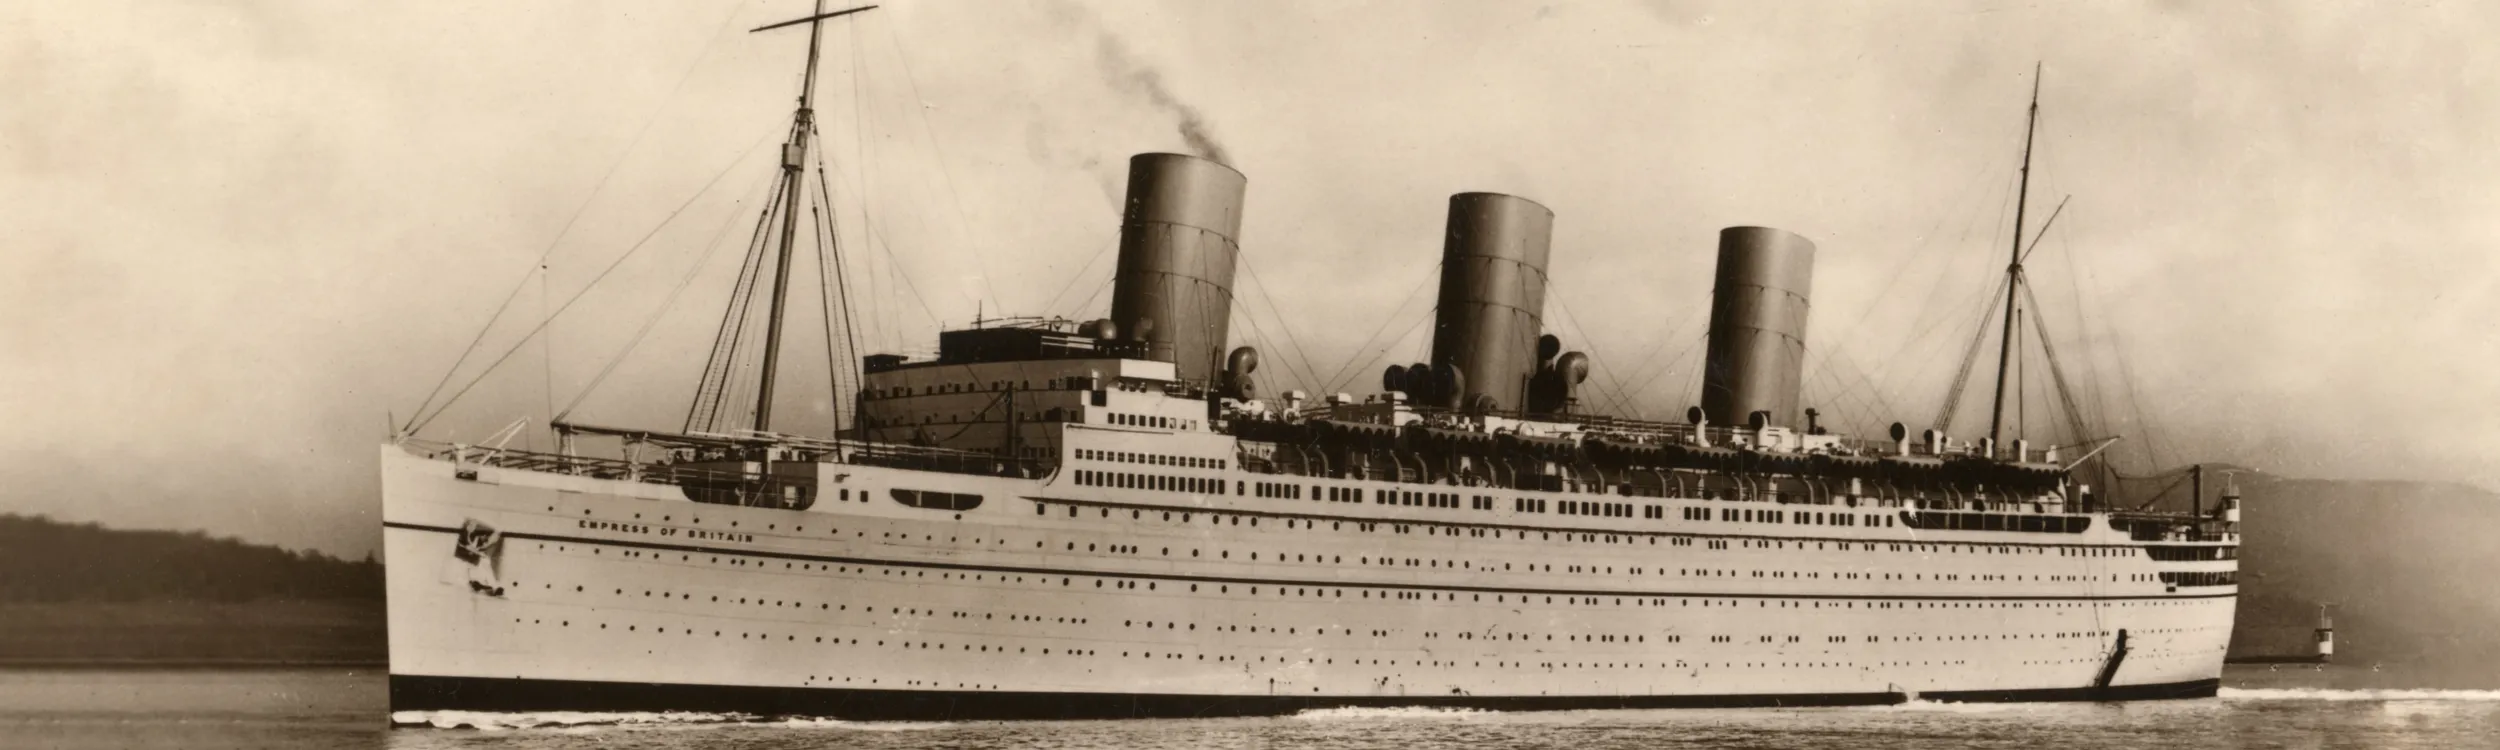 Passenger lists from the 1930s record the voyages of our ancestors